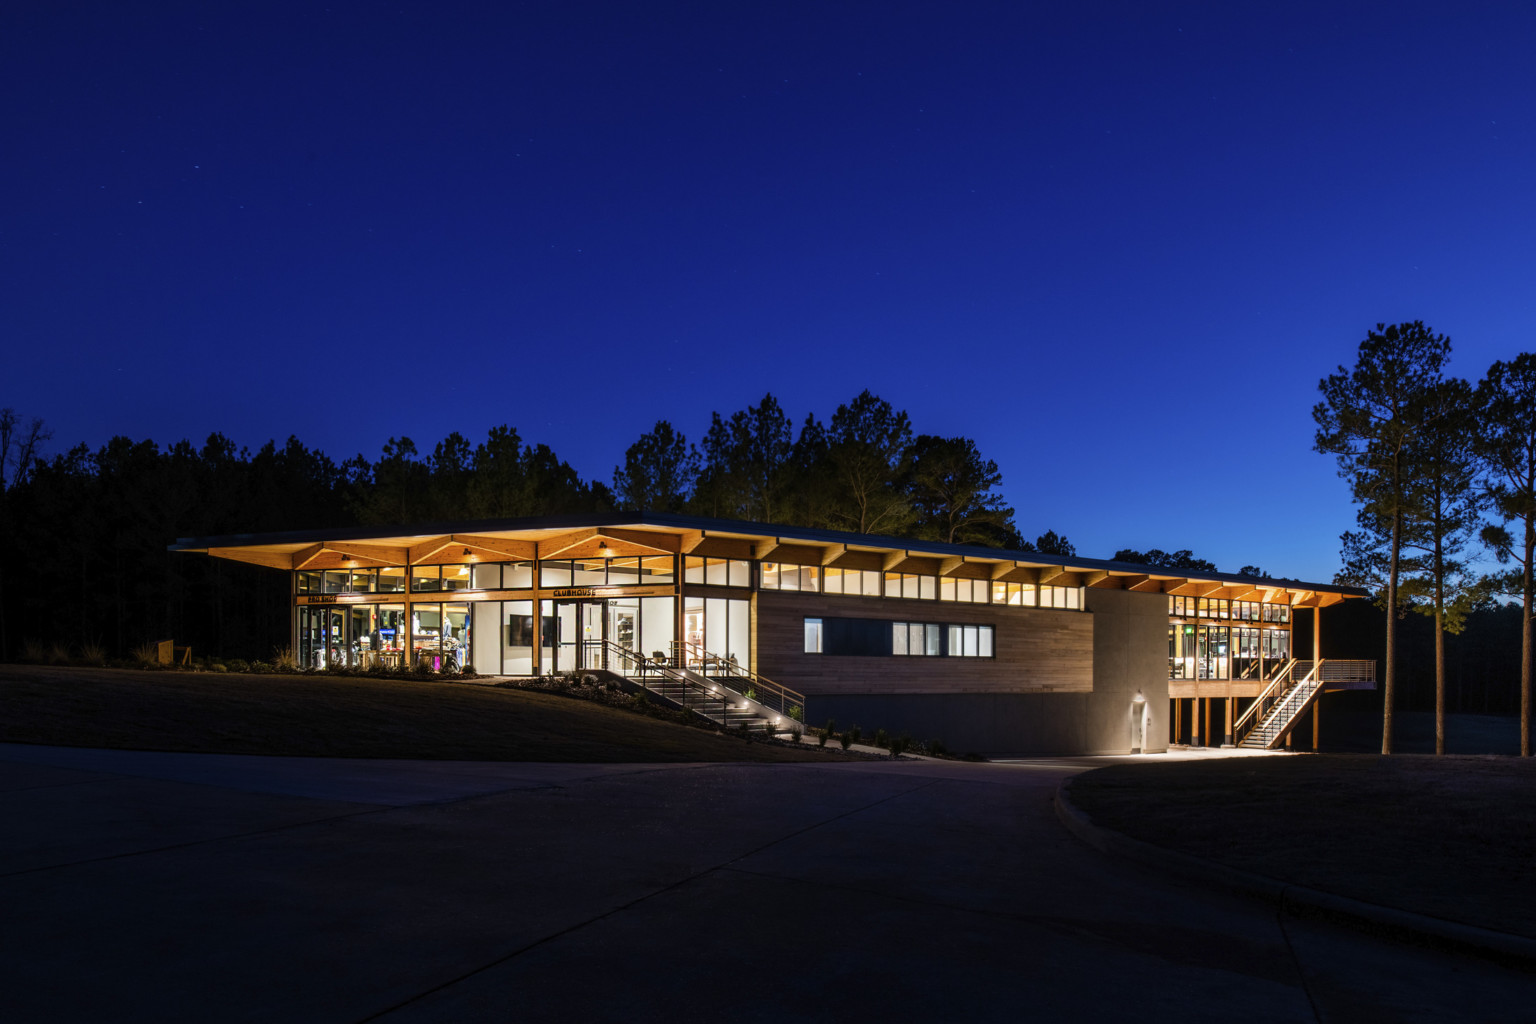 a two story exposed timber frame building with an all glass front set into a hillside along a treeline at night